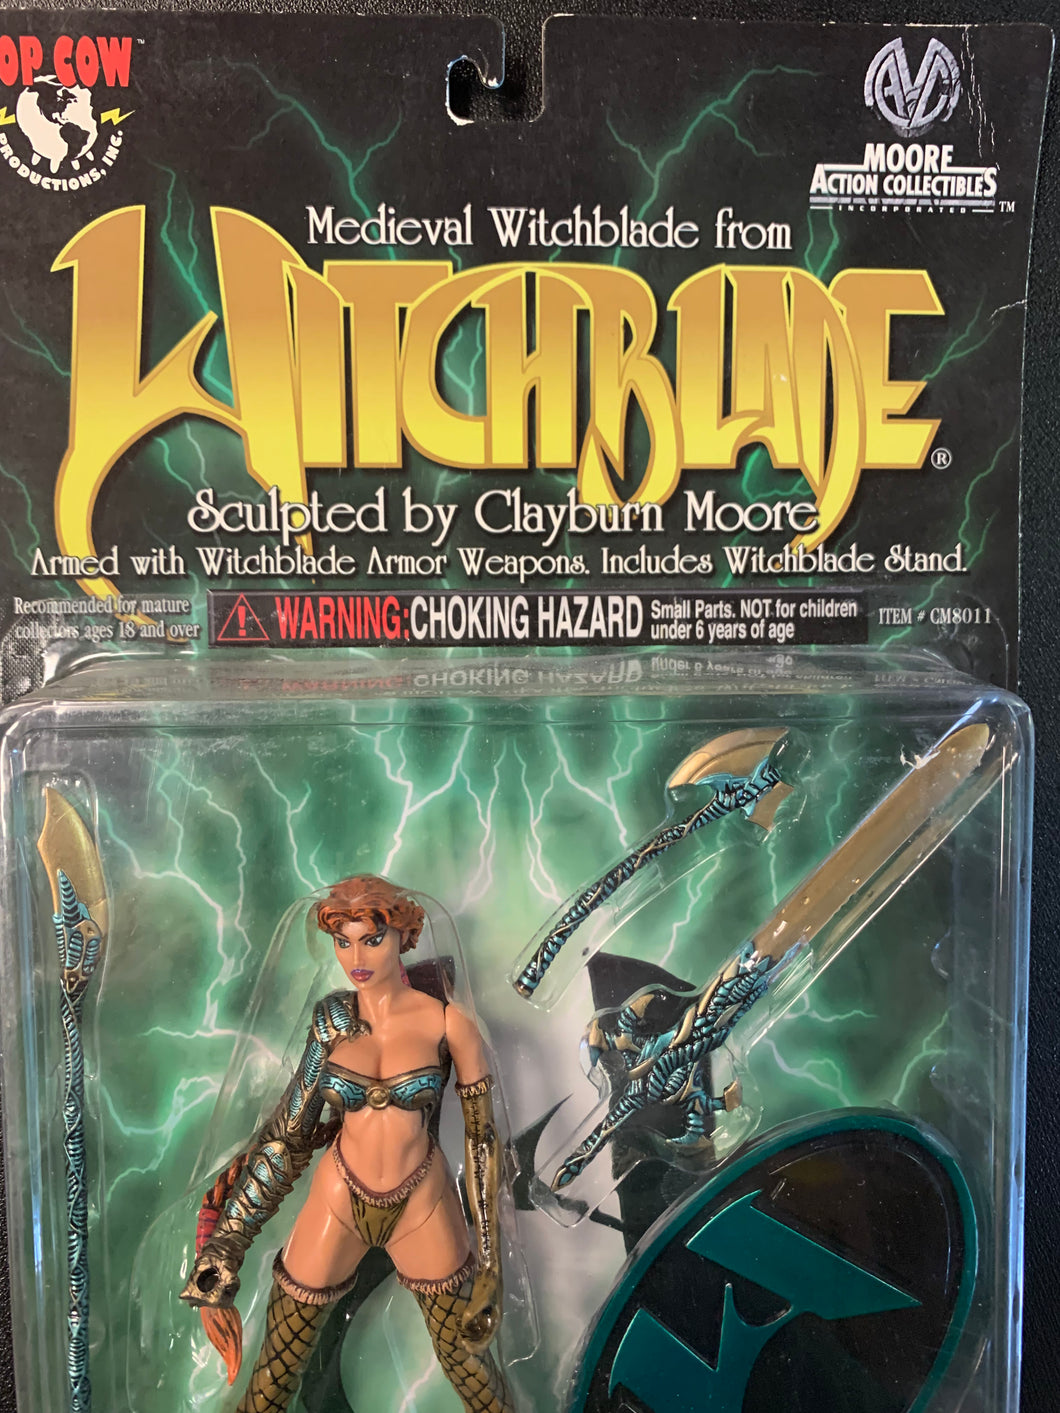 MOORE ACTION COLLECTIBLES WITCHBLADE